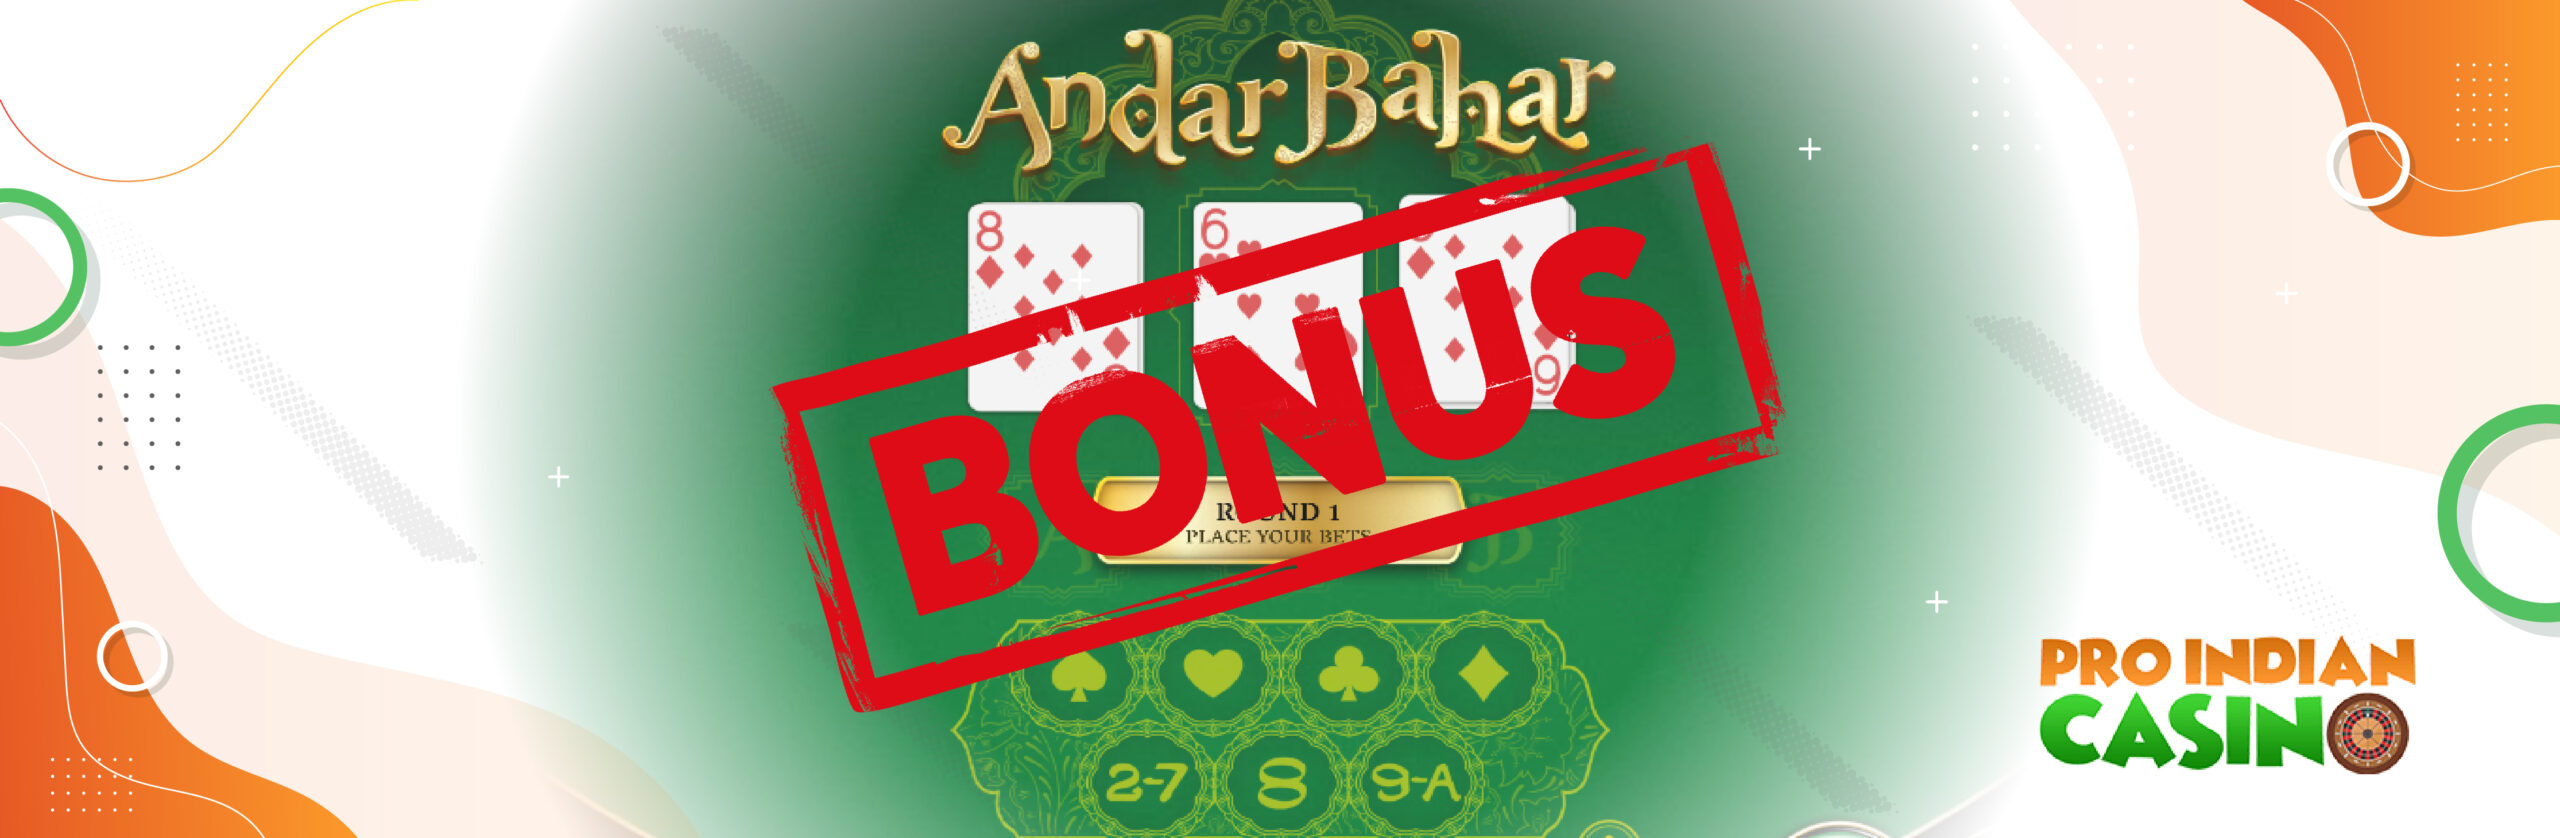 How to get a welcome bonus to play andar bahar online?